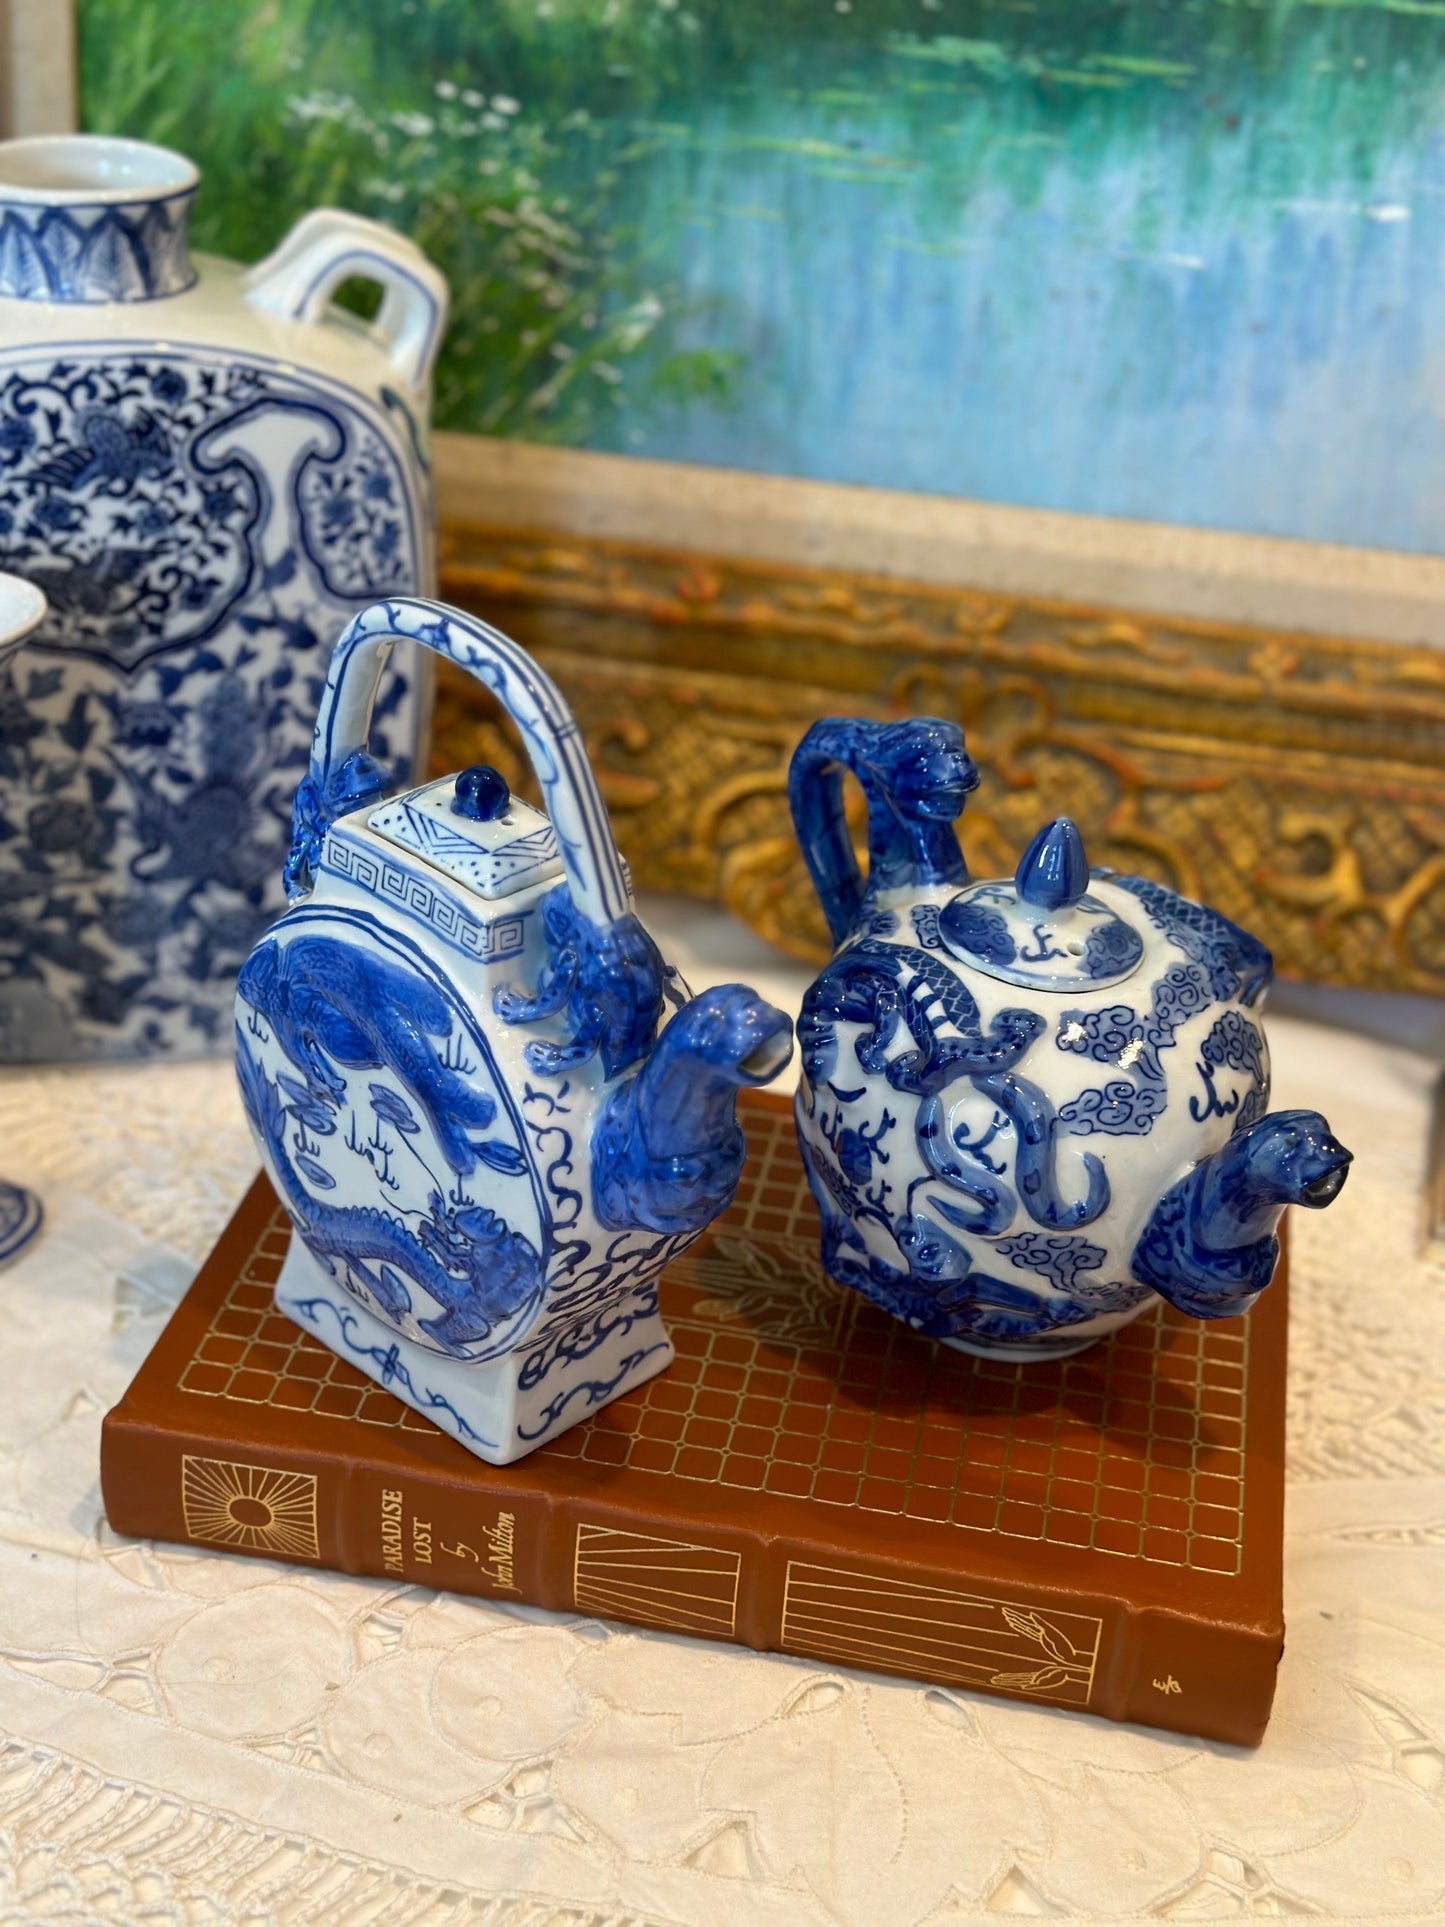 Stunning pair of blue and white dragon-shaped teapots - Pristine!